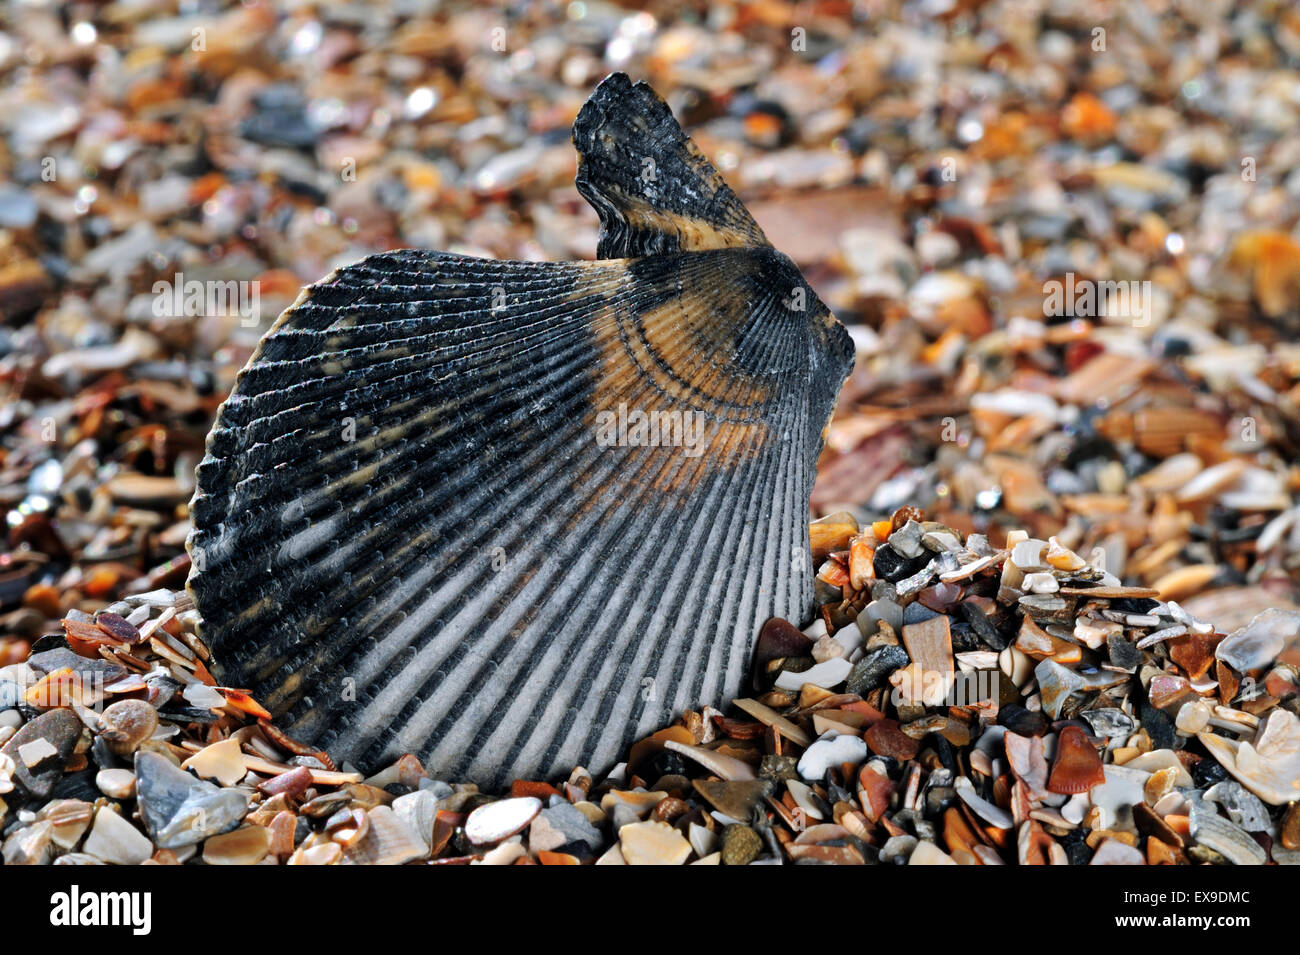 Variegated scallop (Chlamys varia / Mimachlamys varia) shell washed on beach Stock Photo